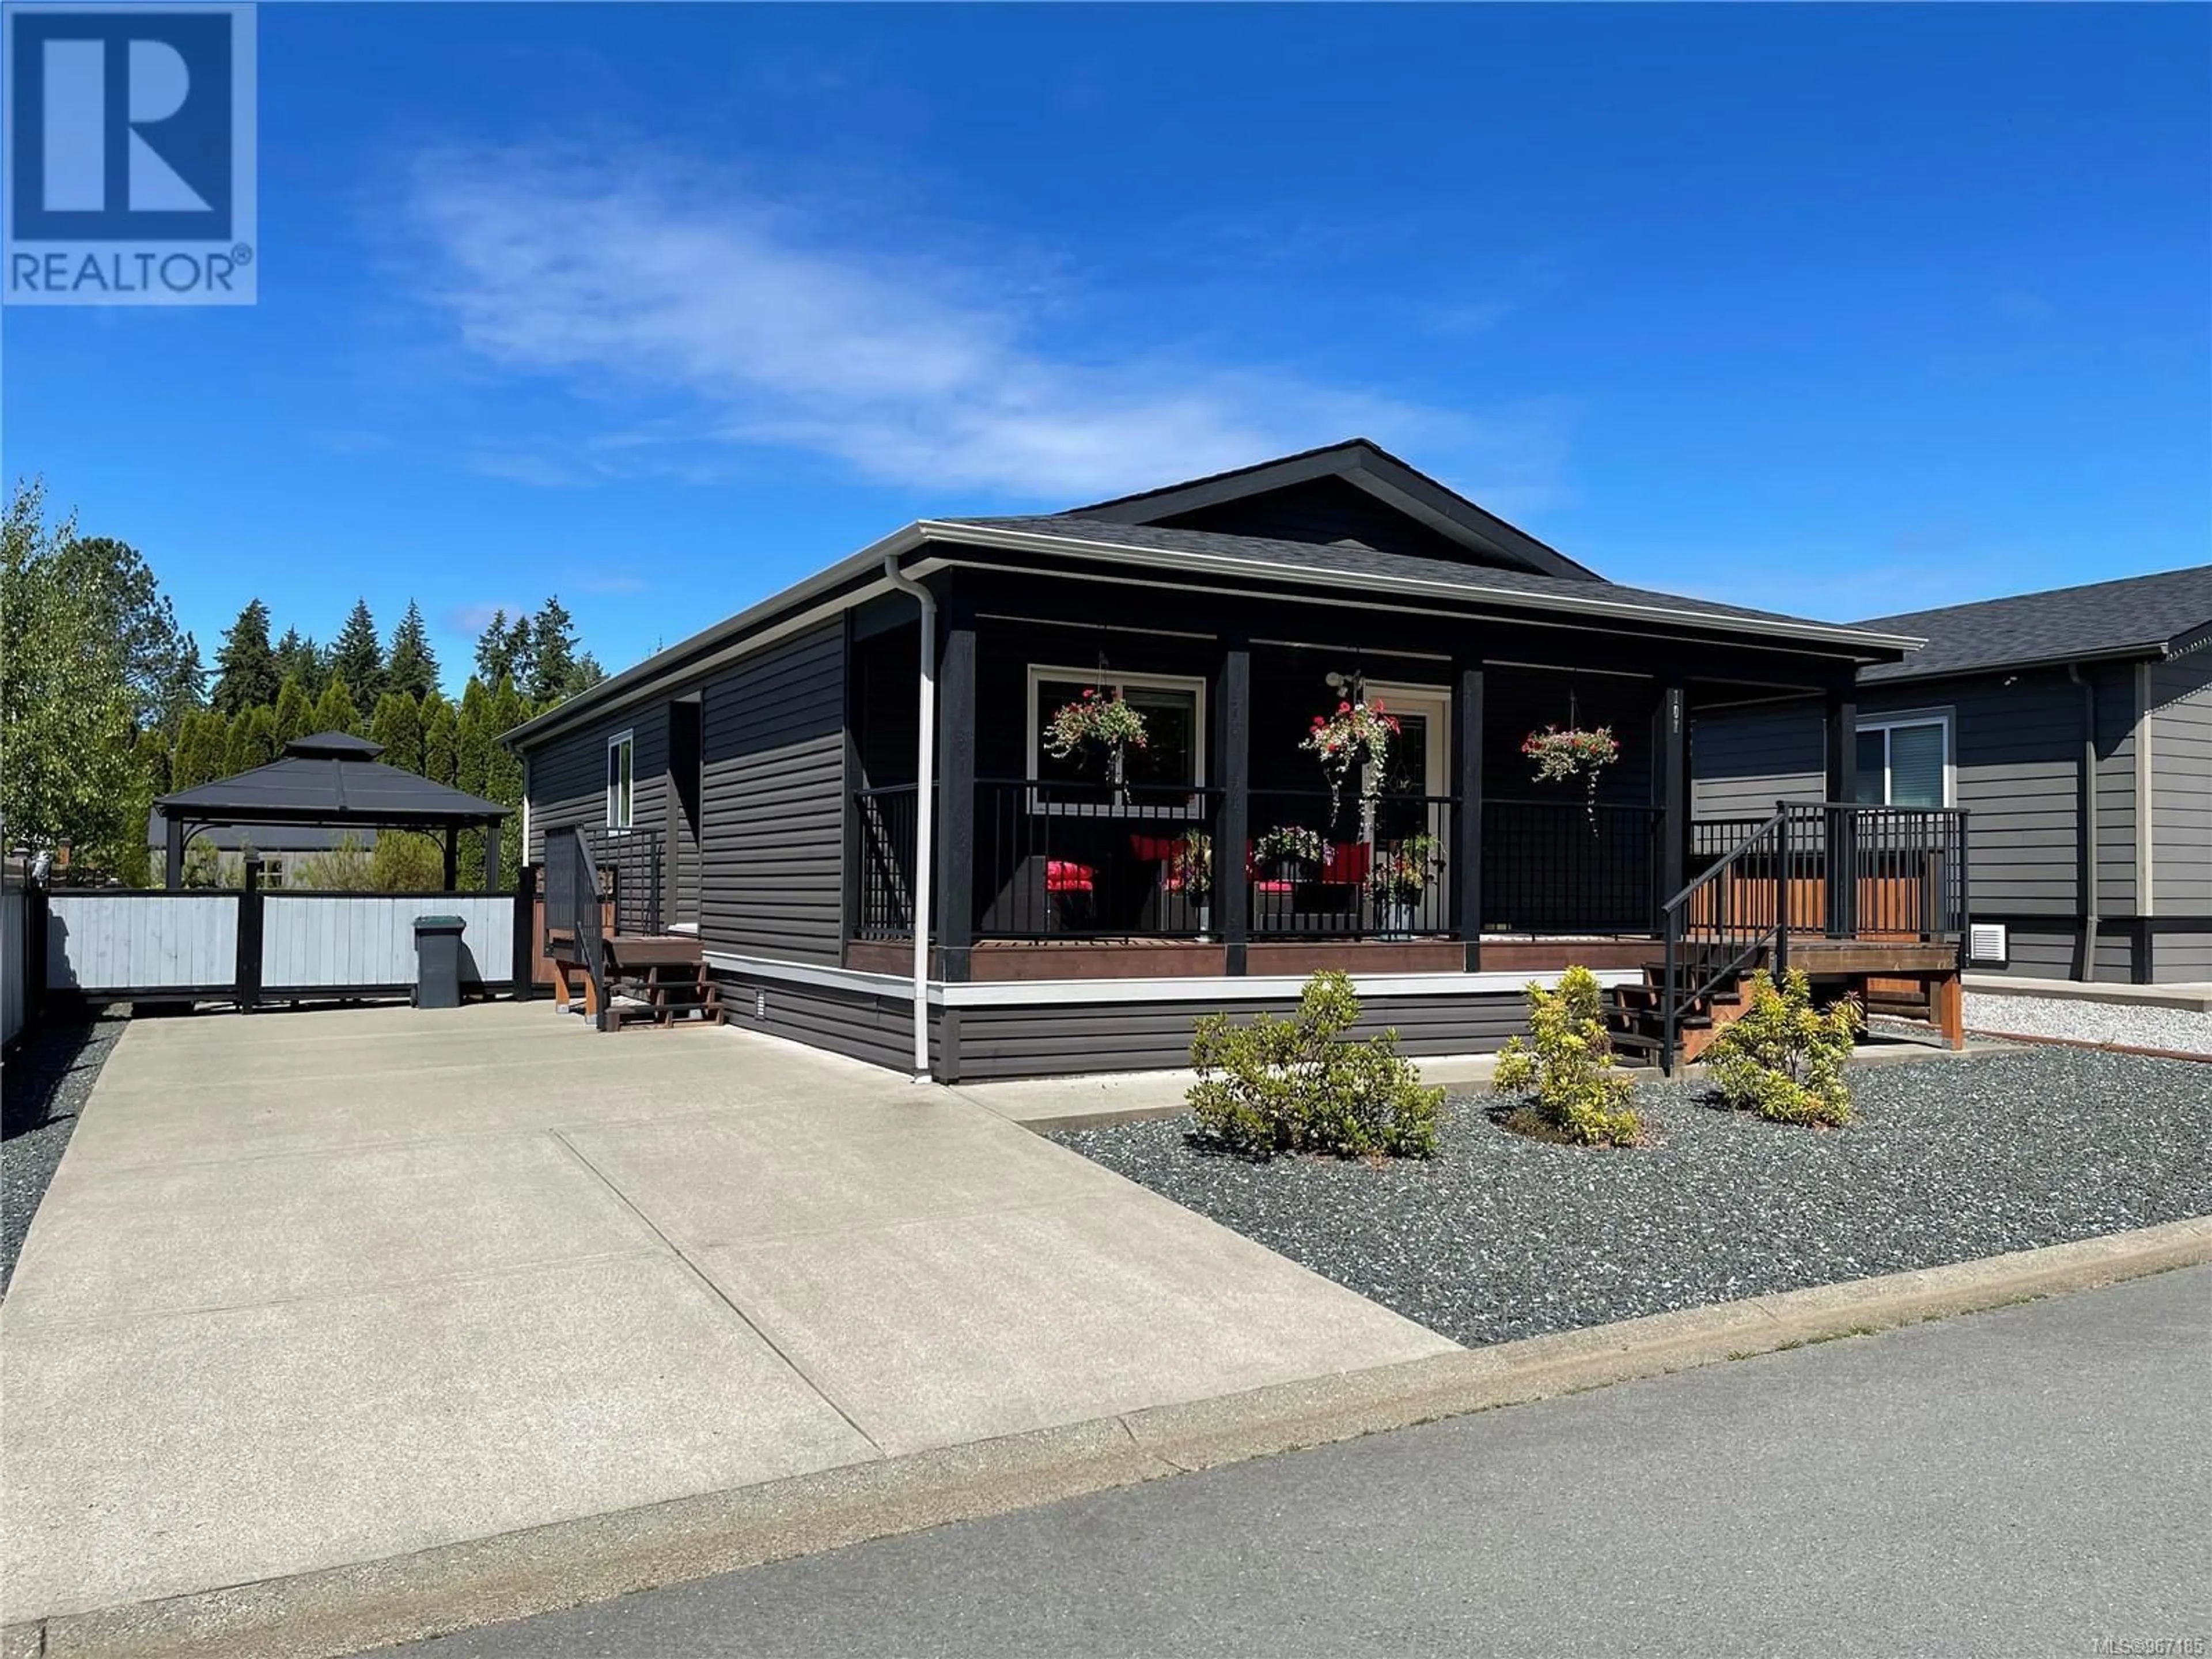 Home with vinyl exterior material for 107 5555 Grandview Rd, Port Alberni British Columbia V9Y8H5